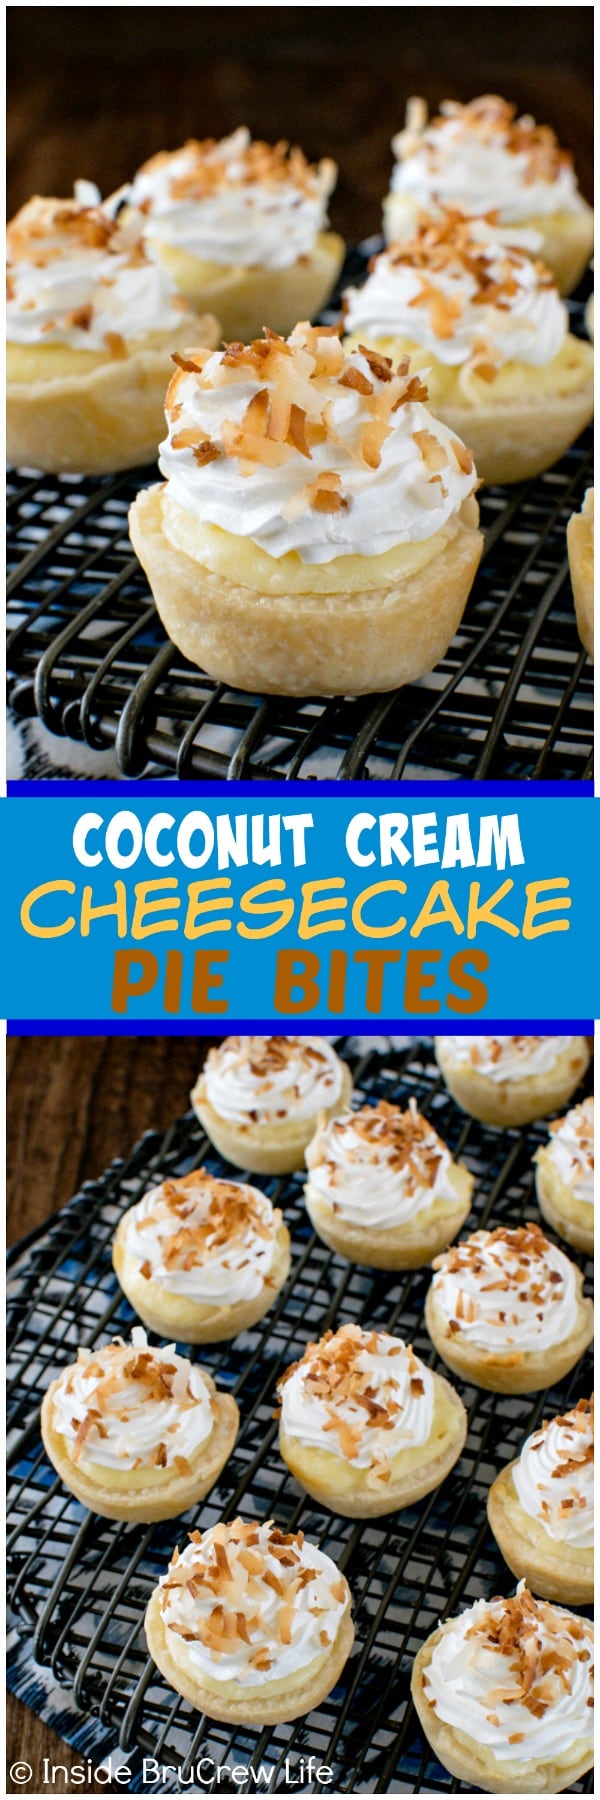 Coconut Cream Cheesecake Pie Bites - these easy mini pies are packed with creamy coconut goodness. Great dessert recipe for fall dinner parties!